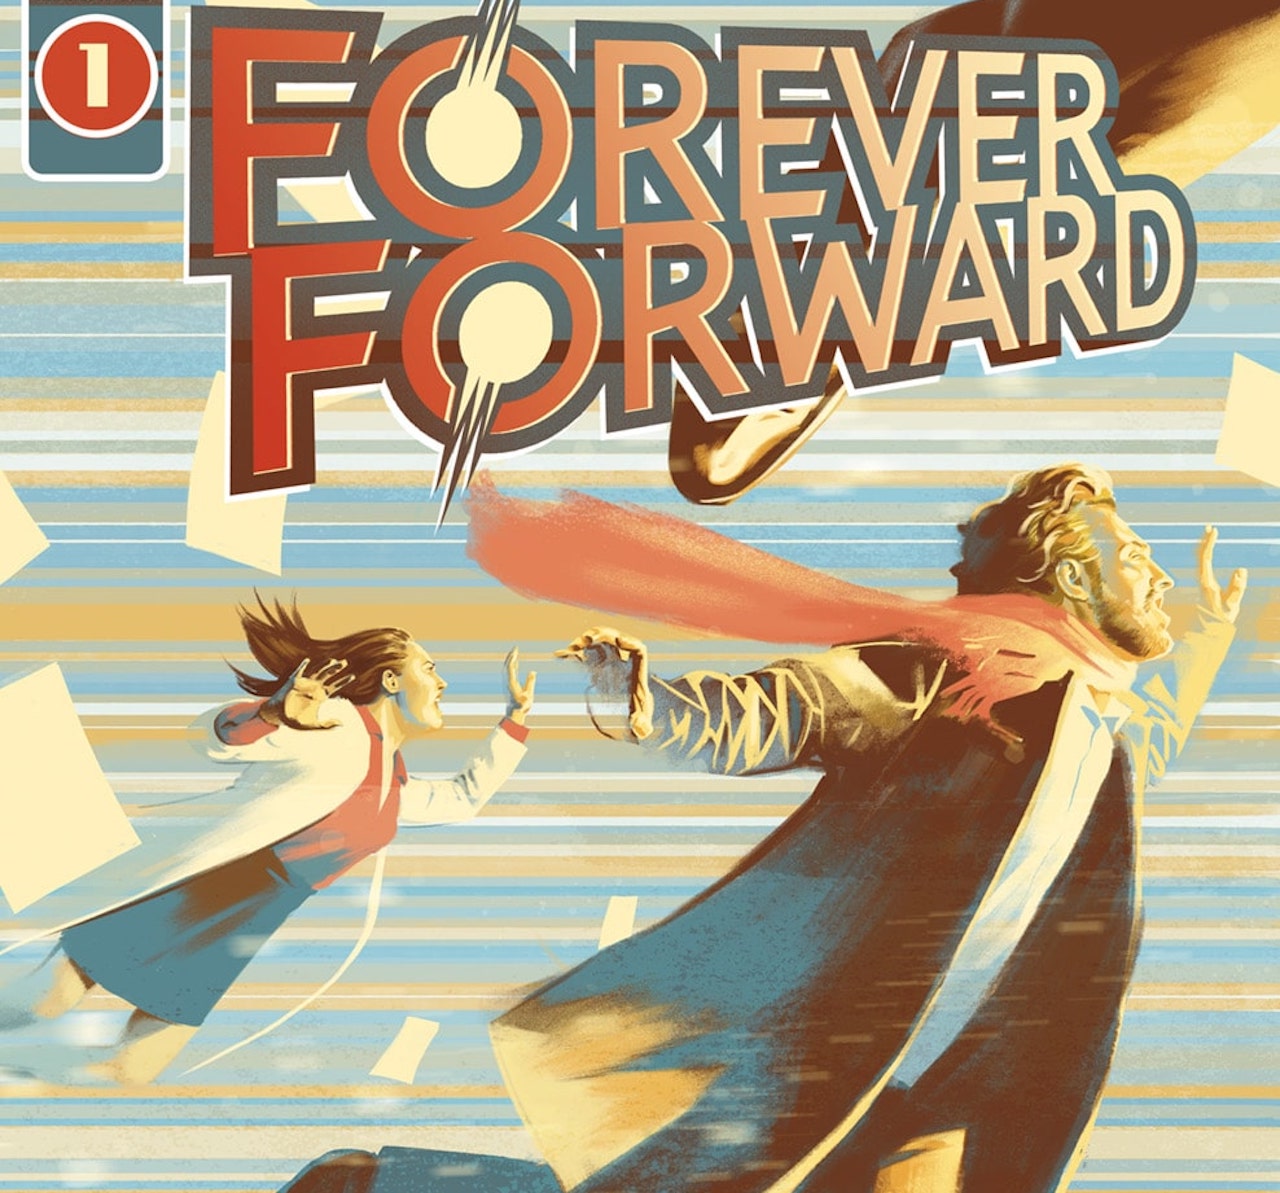 ‘Forever Forward’ #1 doesn’t utilize its intriguing elements well enough